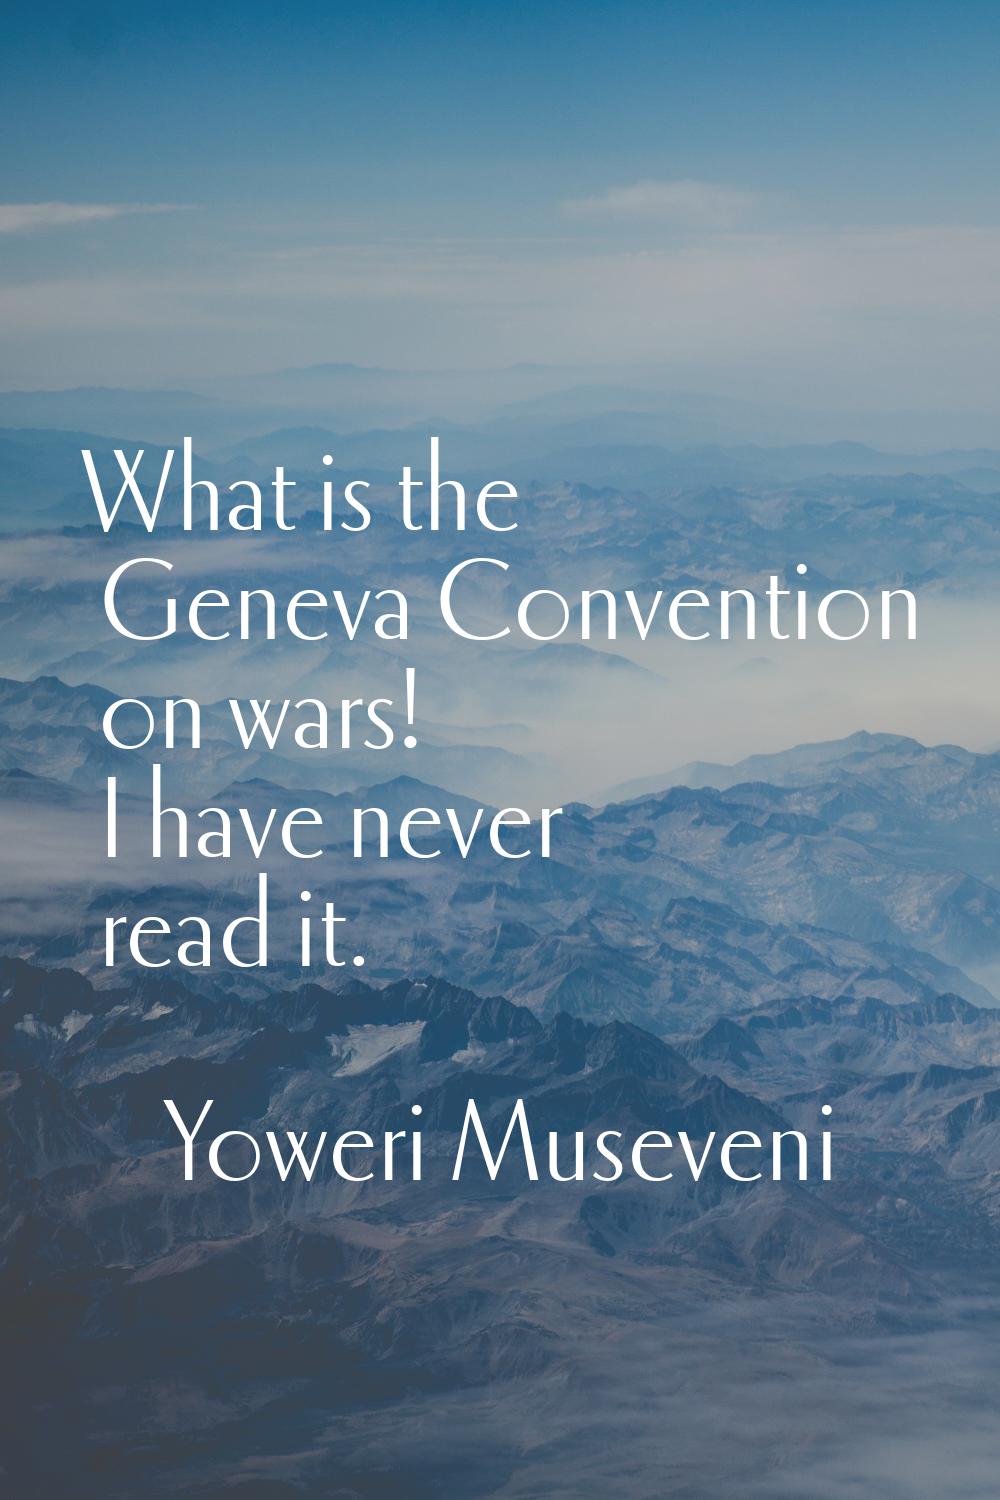 What is the Geneva Convention on wars! I have never read it.